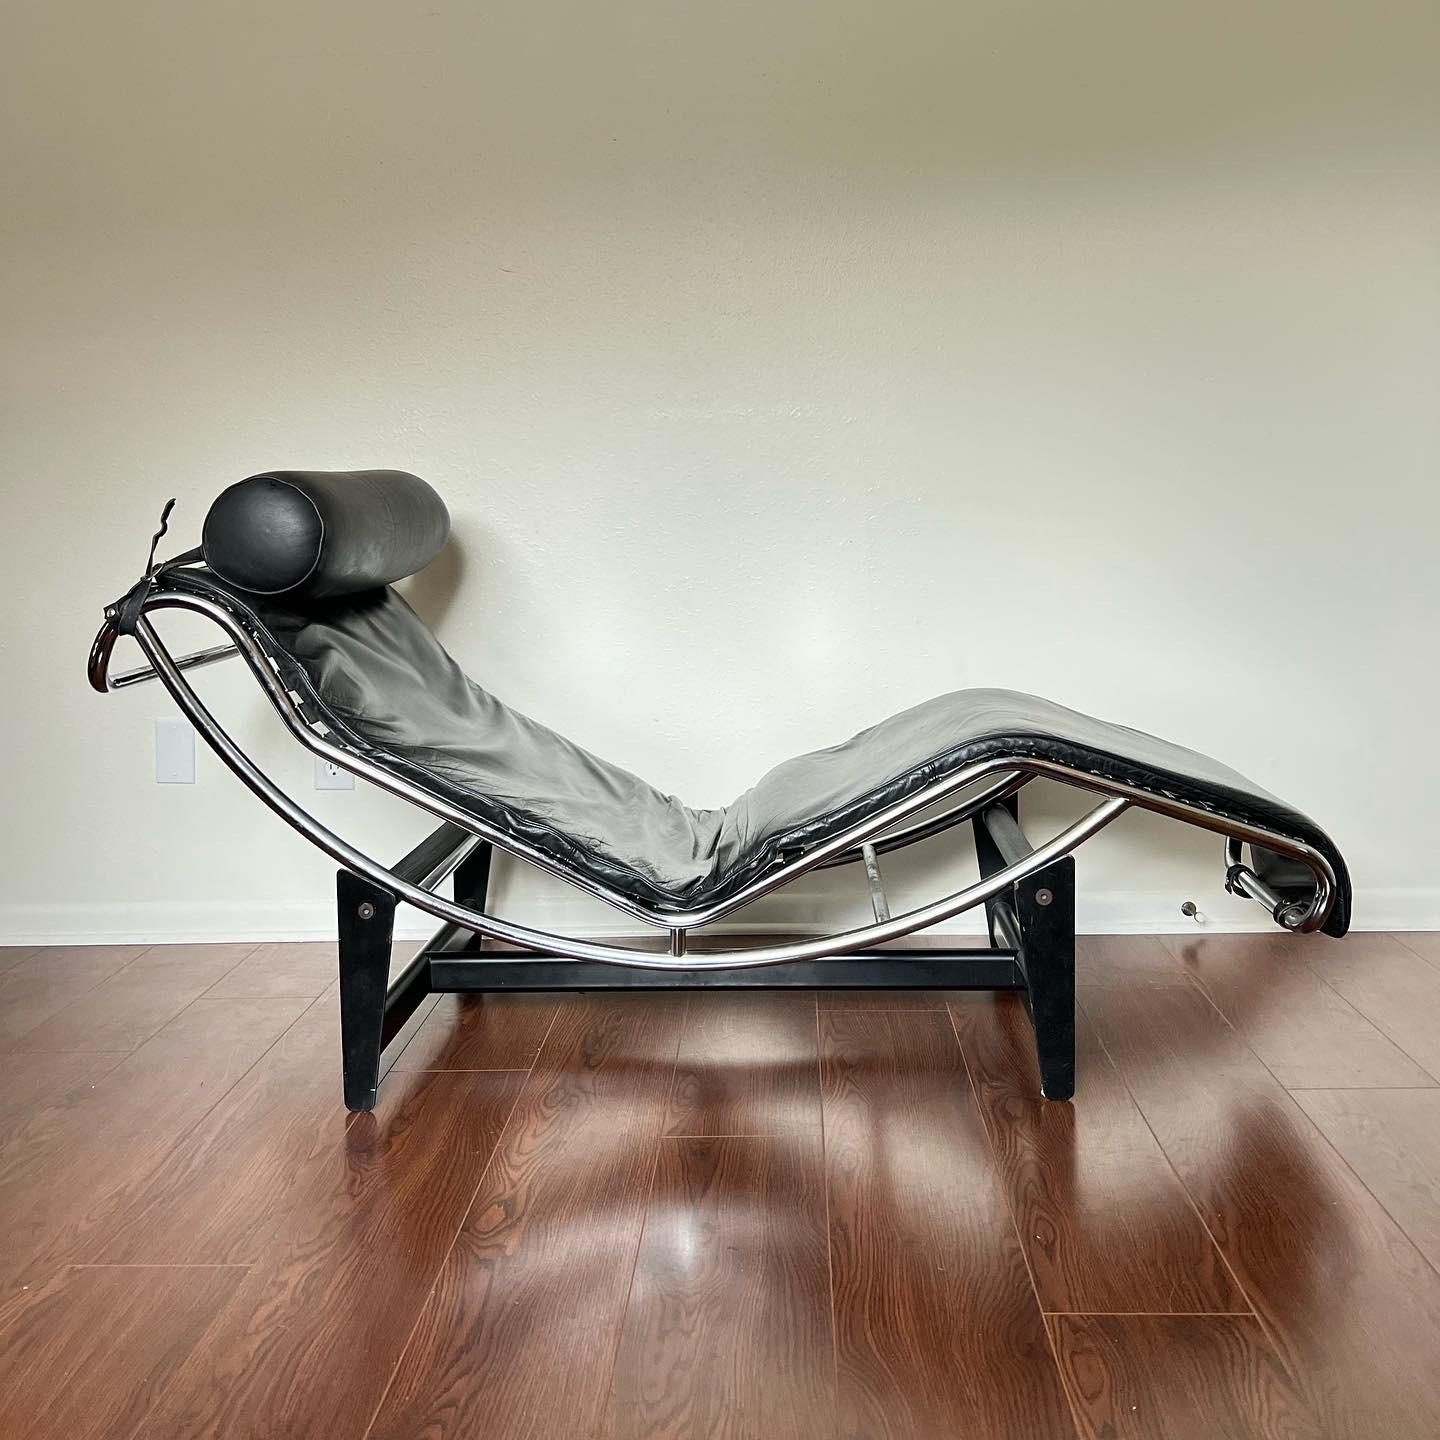 A superb chaise lounge chair from the 1980s in the style of Le Corbusier. Comes in two parts. Sliding on its supports the design utilizes the forces of gravity and your touch to adjust its angle from upright lounging to horizontal lounging. Once put